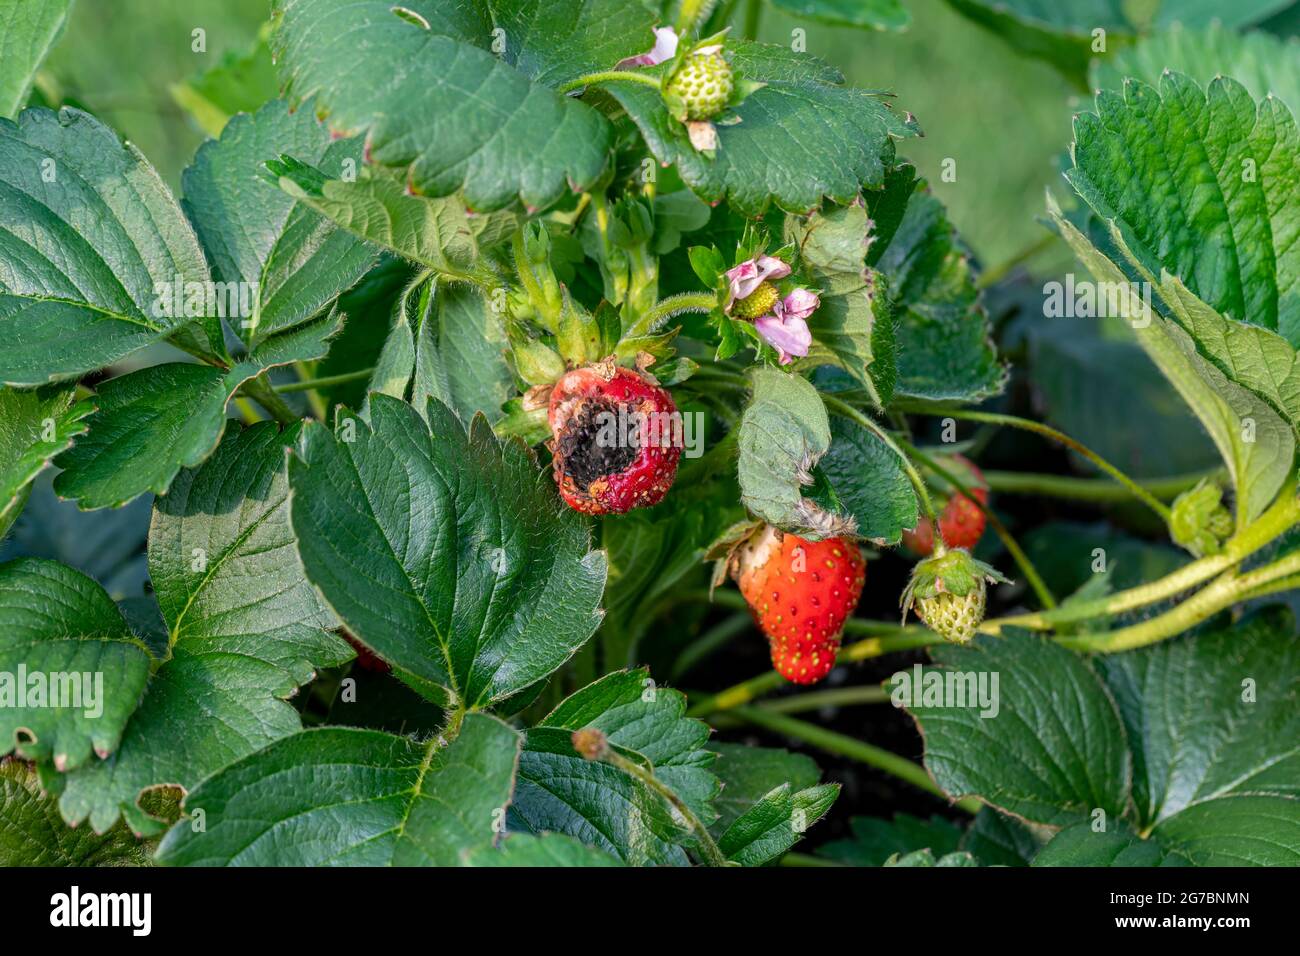 Strawberry fruit with black spot fungus. Gardening, horticulture and organic agriculture concept Stock Photo